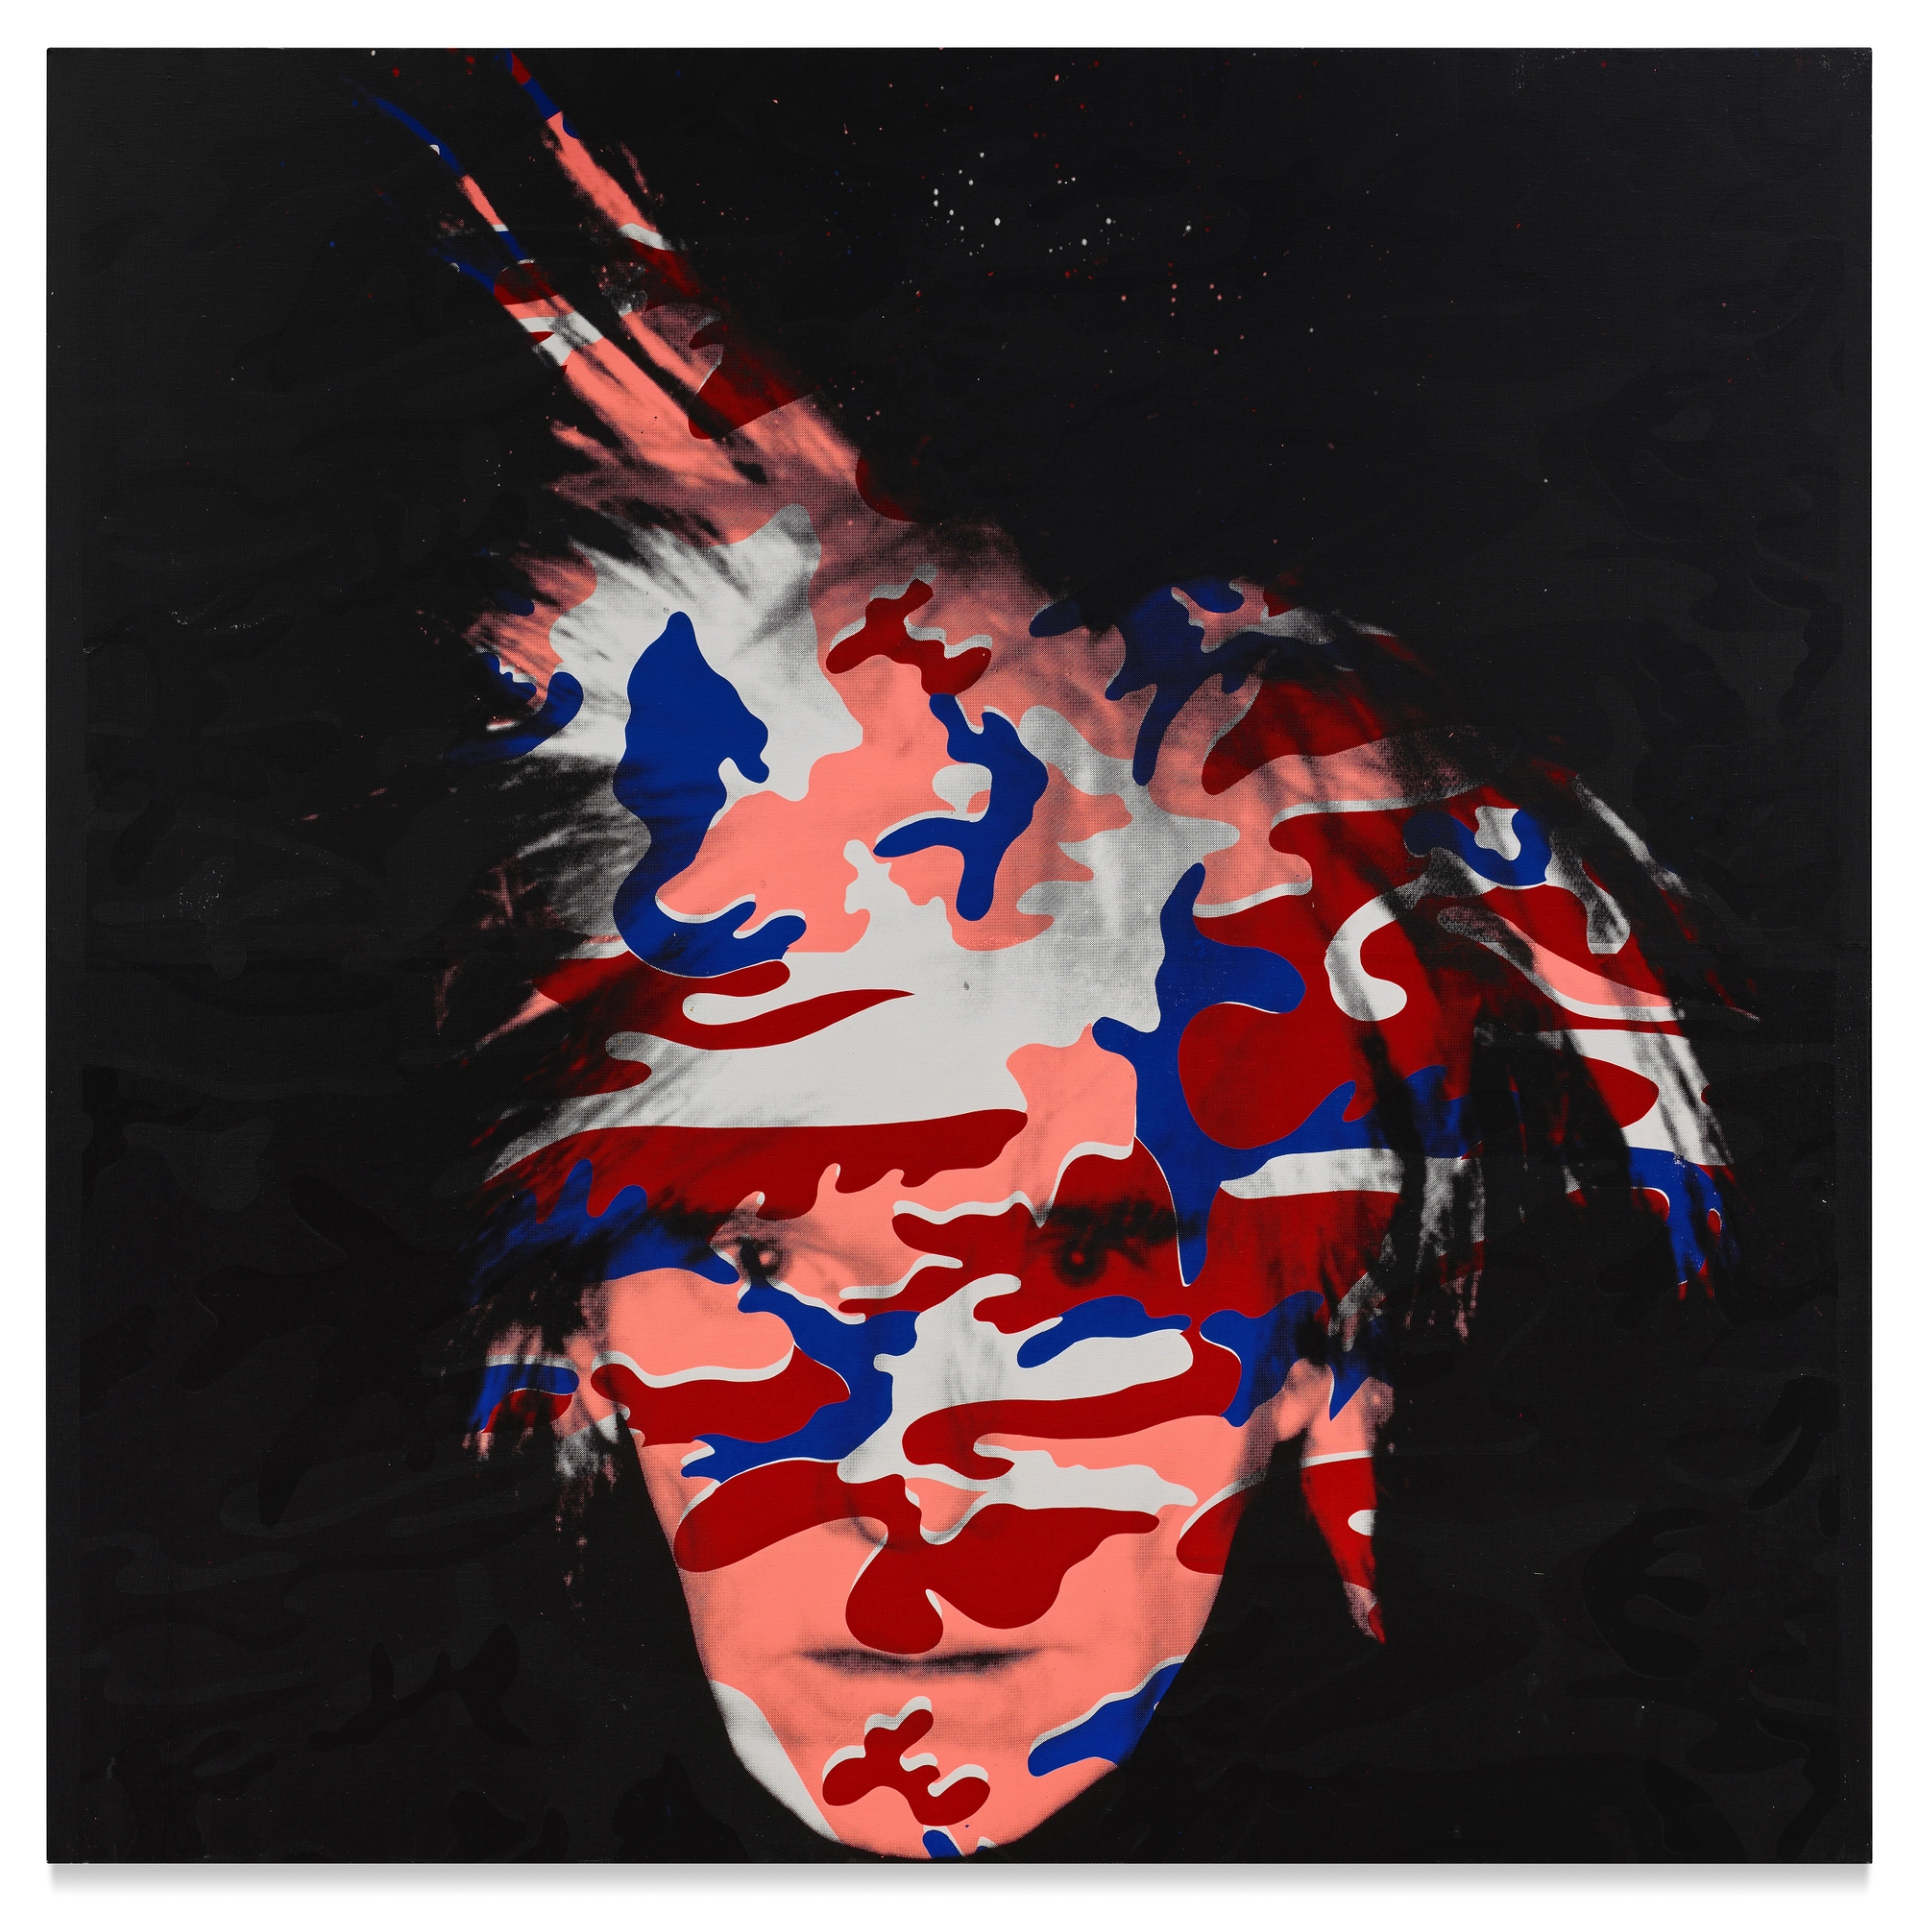 An image of a self-portrait by Andy Warhol. A monochrome photograph of the artist is overlaid with a camouflage pattern done in red, blue and peach.